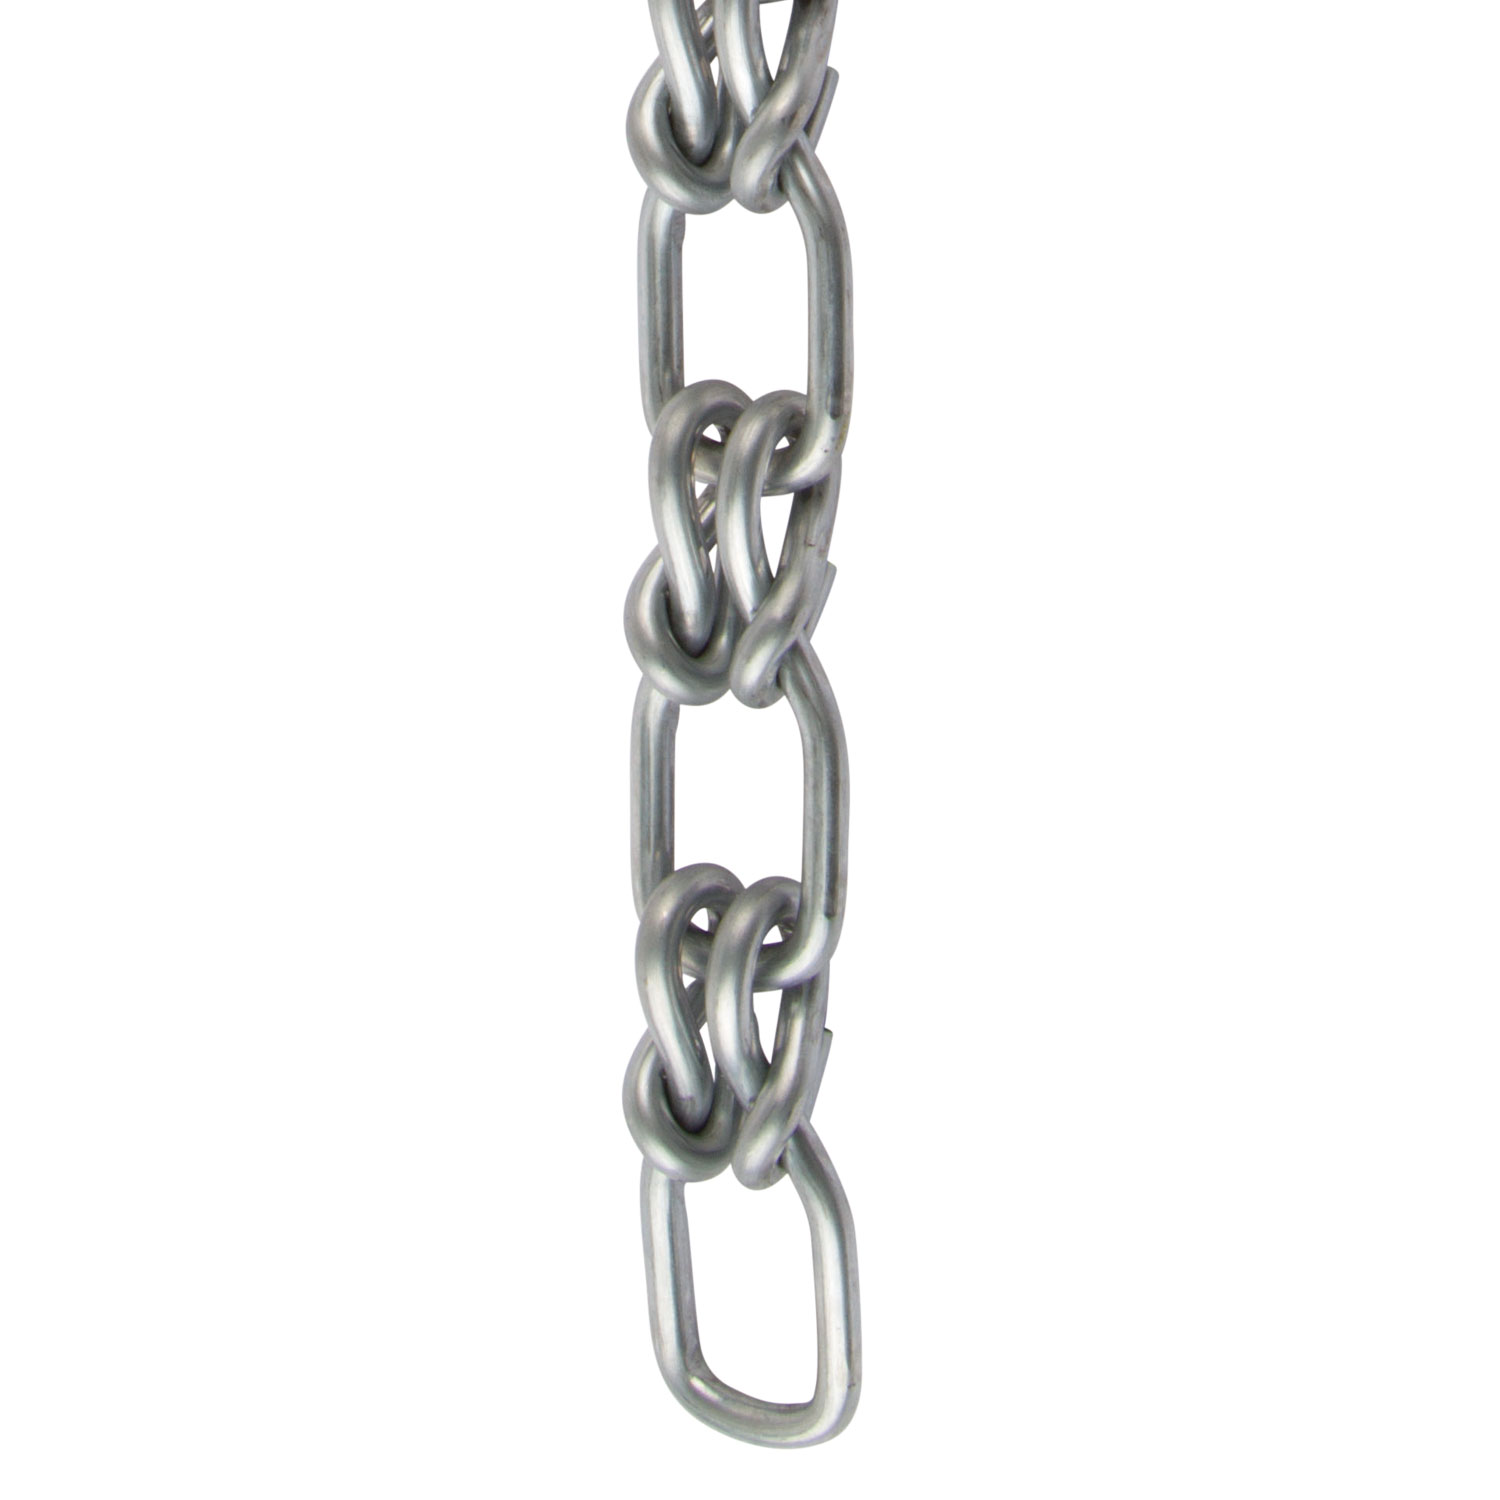 25 FT Carton Plated Steel Zinc Perfection Chain Products 54976 #35 Stamp Sash Chain 